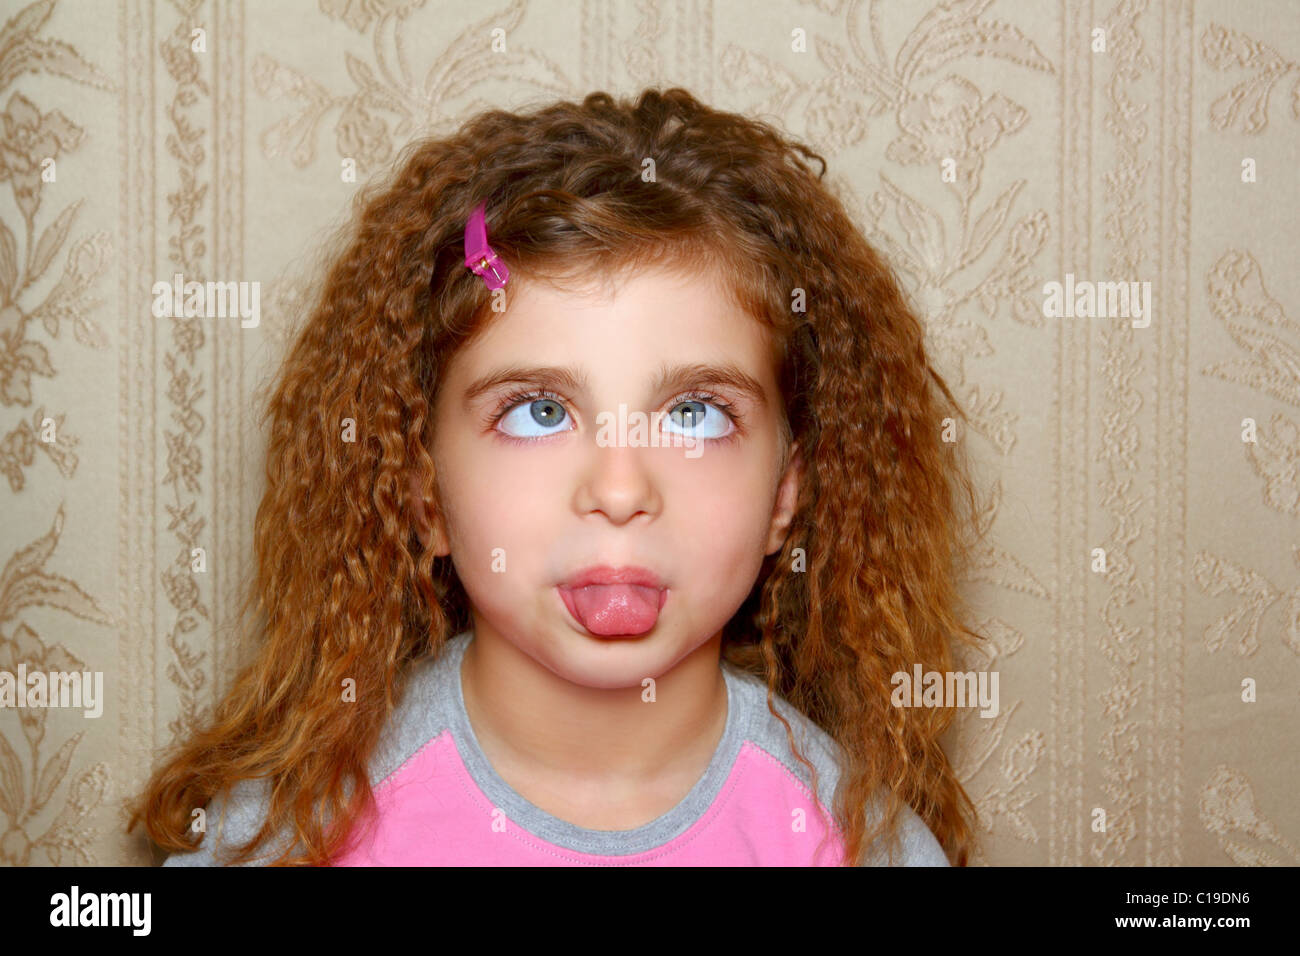 funny girl face ugly expression cross-eyed squinting on retro wallpaper Stock Photo